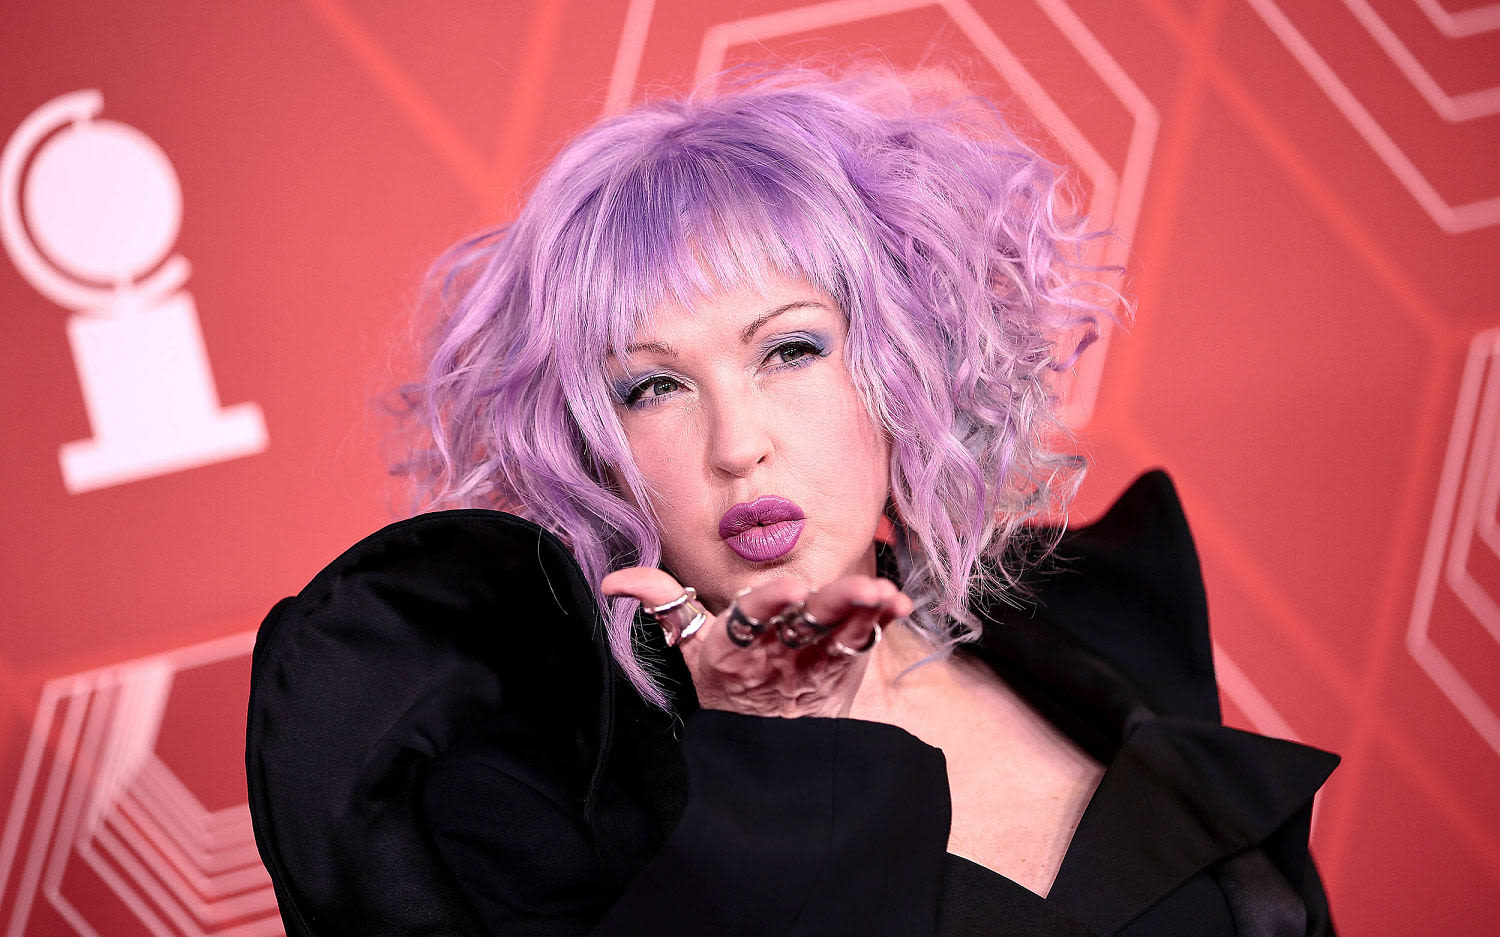 Cyndi Lauper is hitting the road for farewell tour. Everything to know